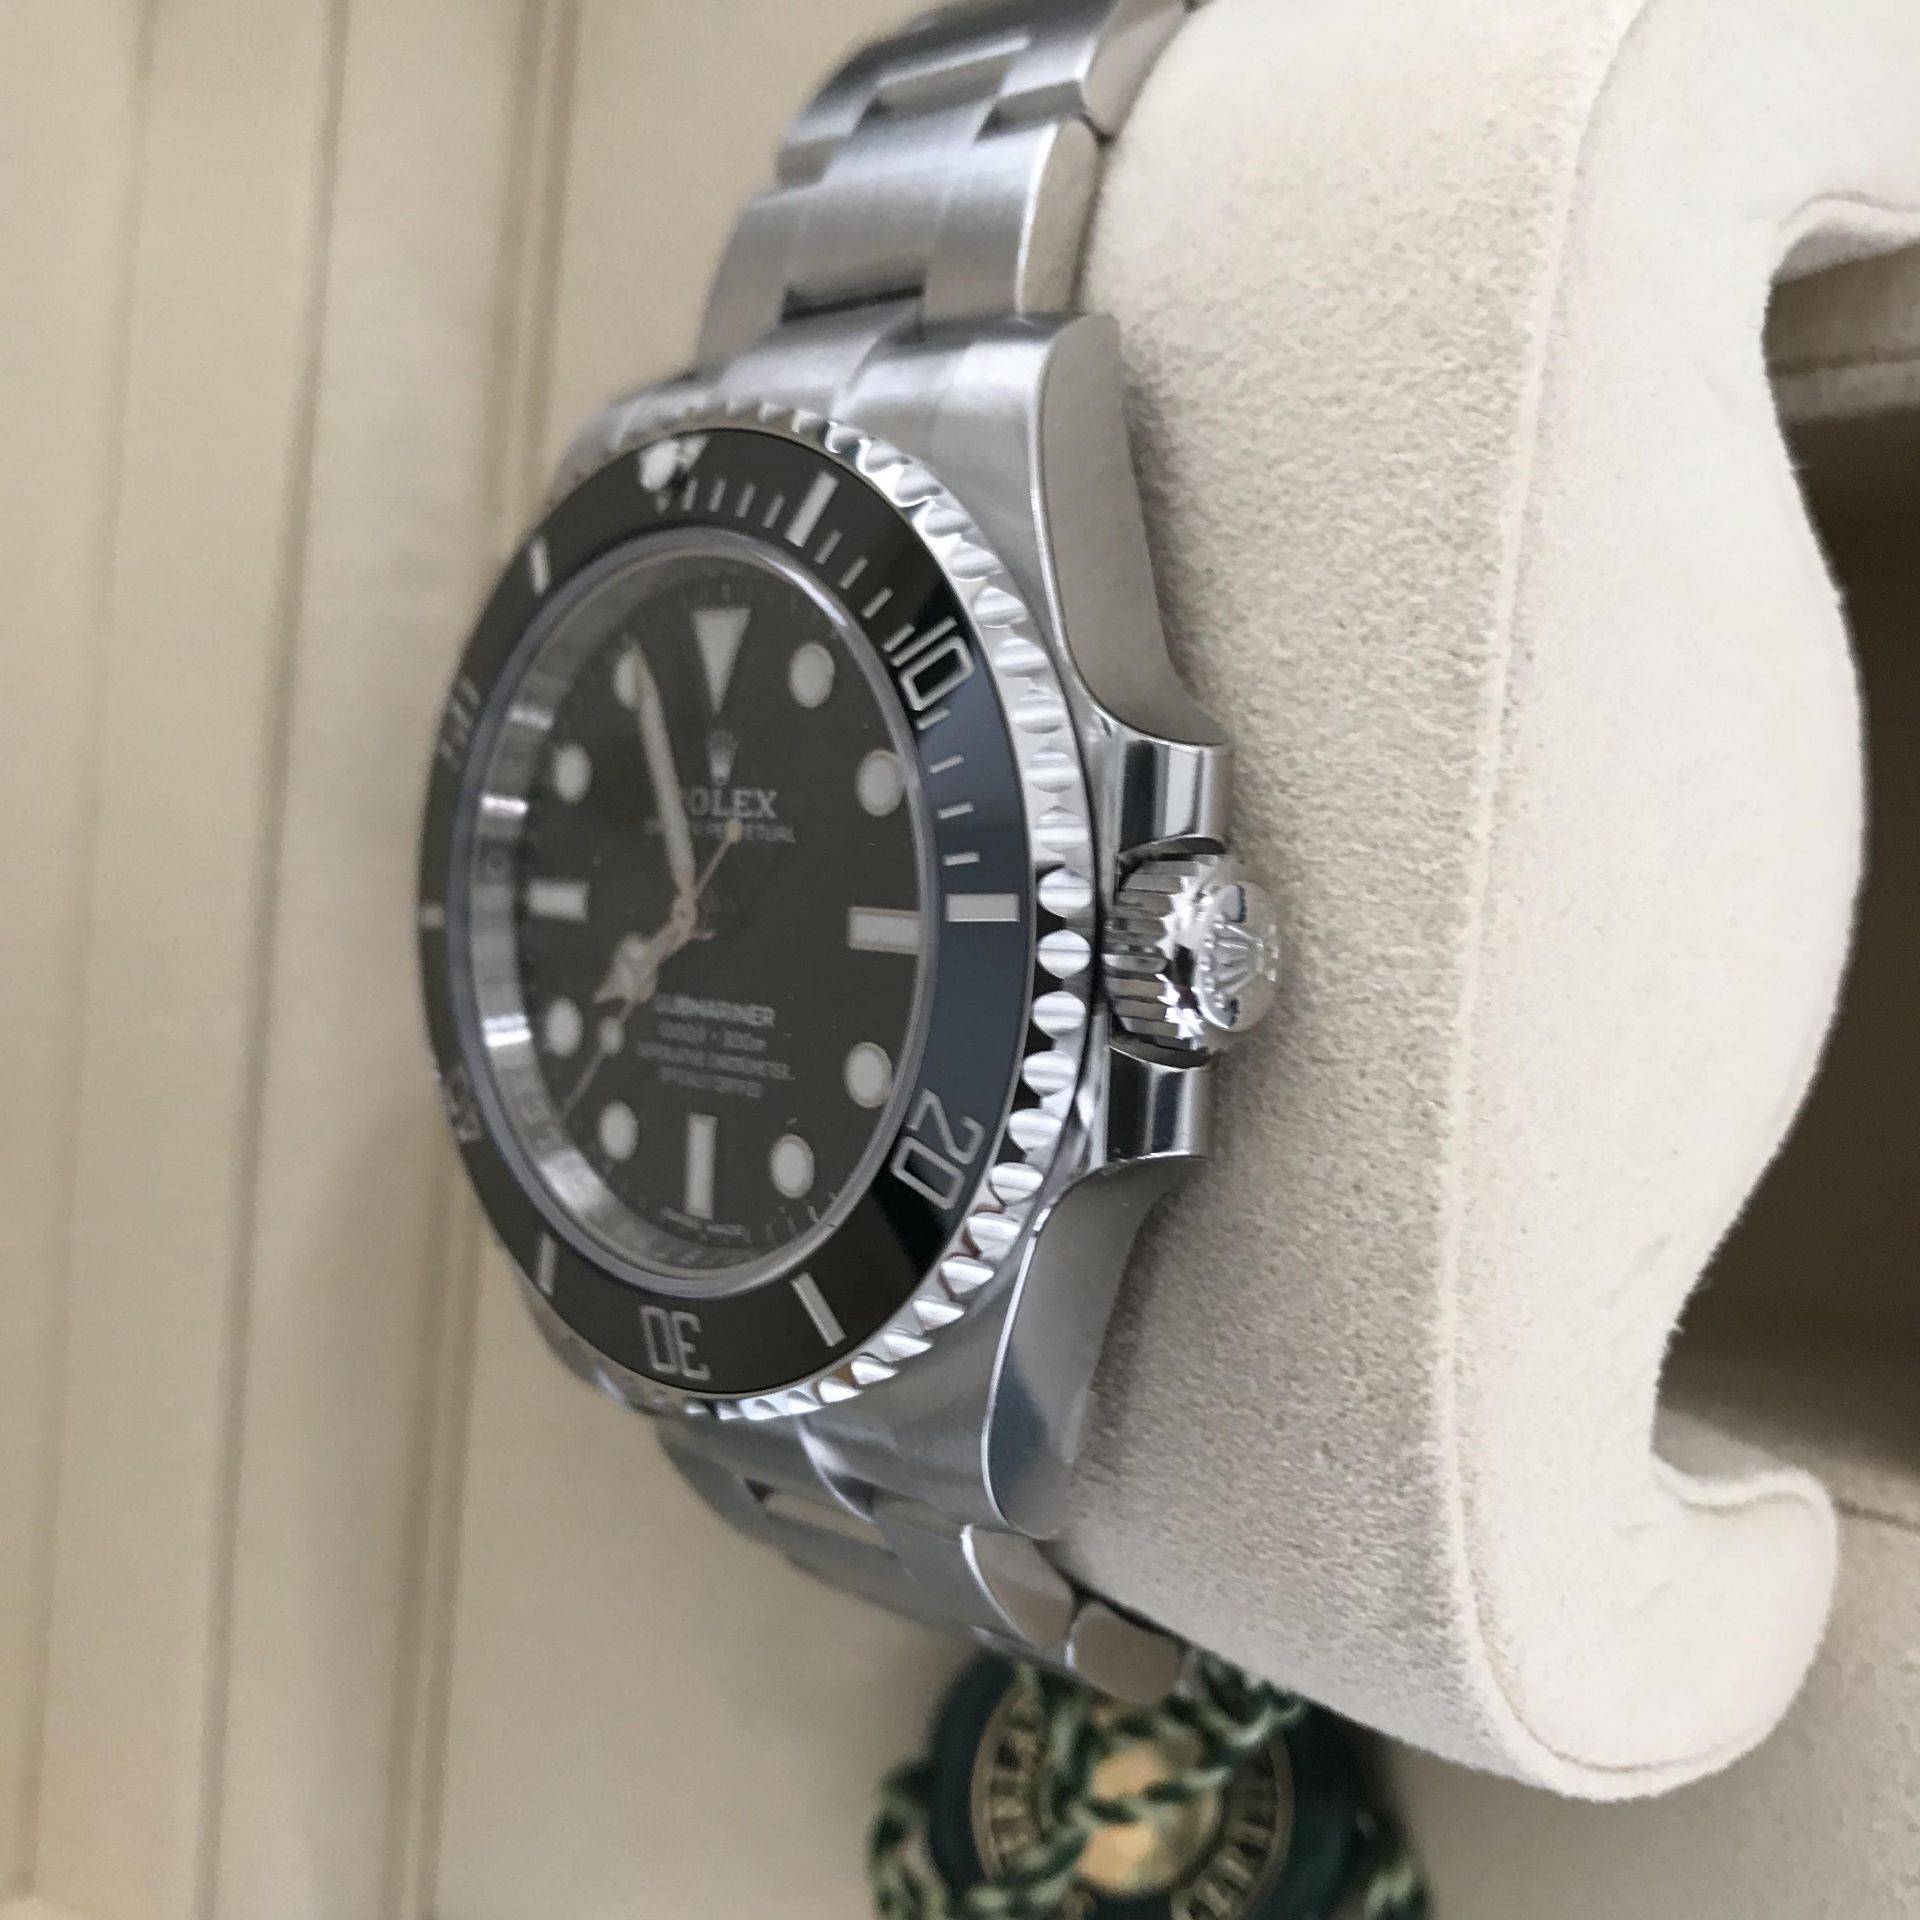 2020 ROLEX SUBMARINER OYSTER STEEL 40 MM WATCH 114060 - Image 12 of 15